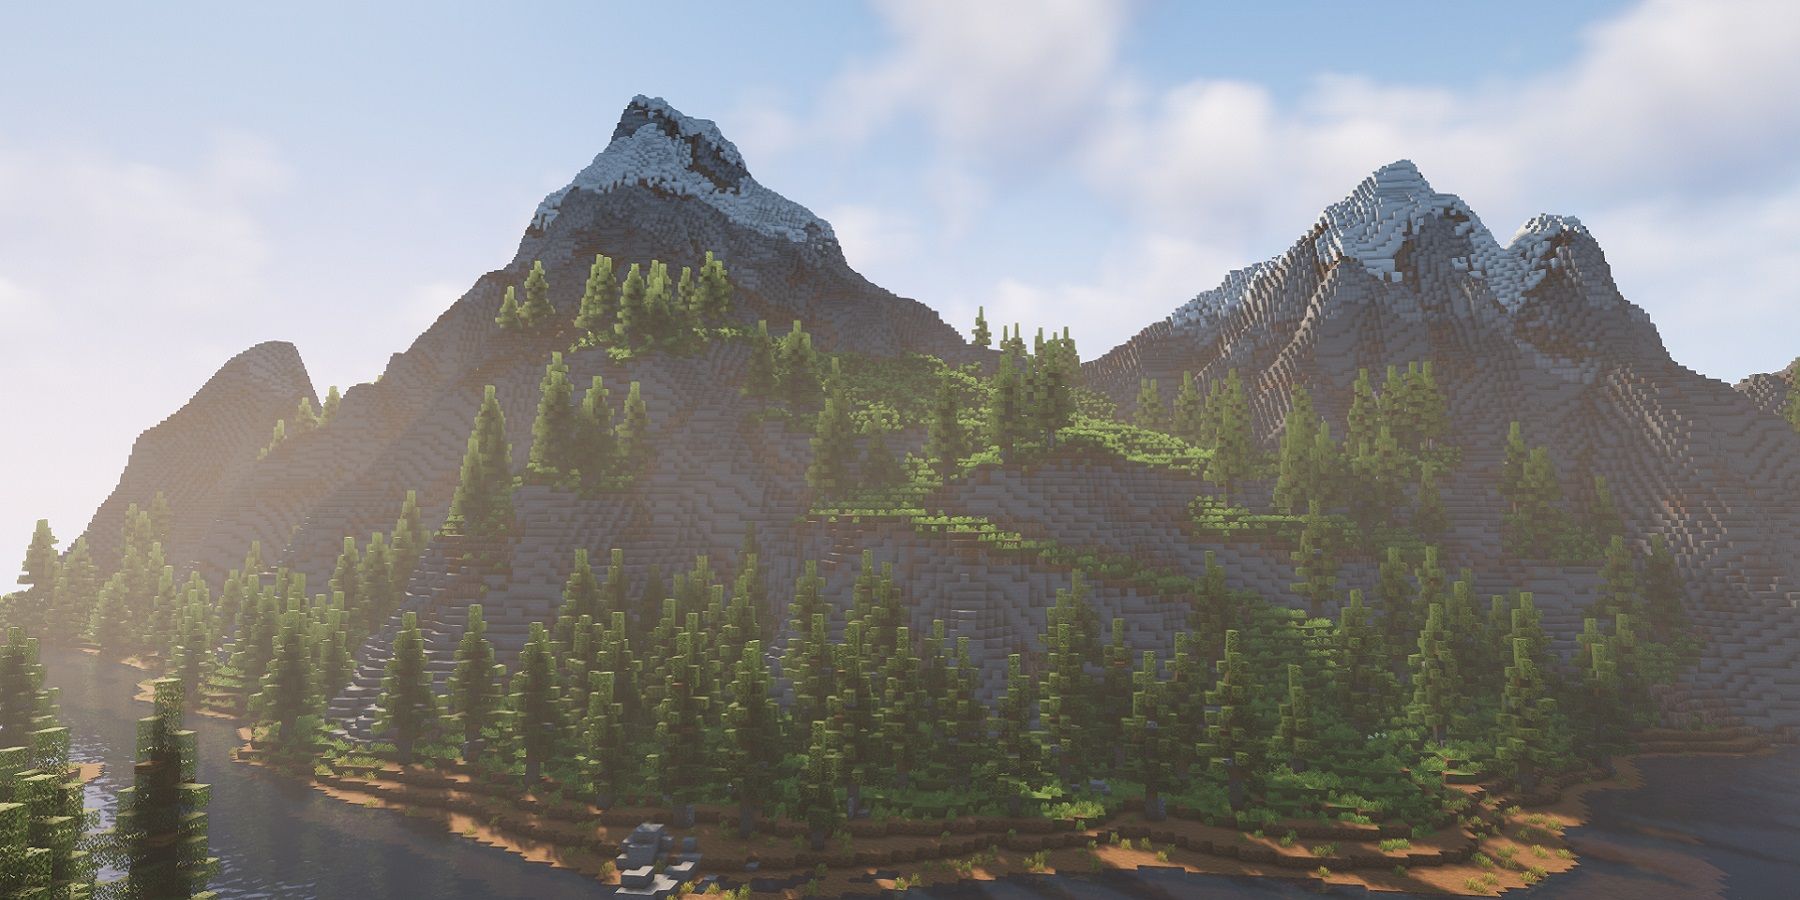 Screenshot from Minecraft showing some mountains in the distance lit by the sunlight.